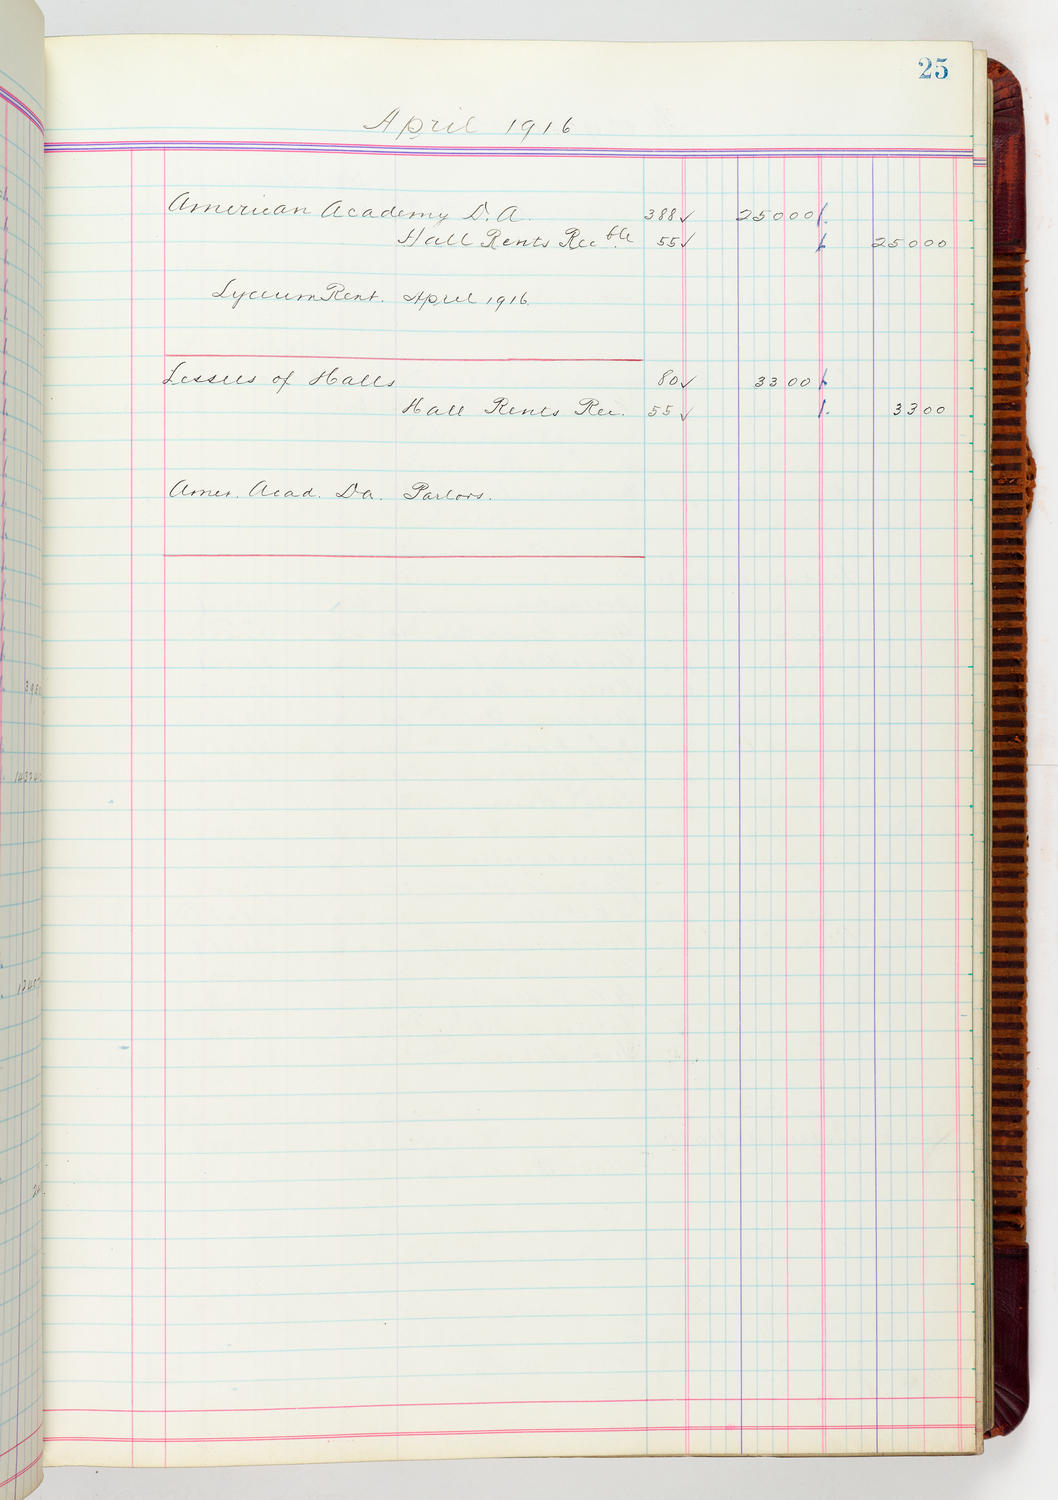 Music Hall Accounting Ledger, volume 5, page 25